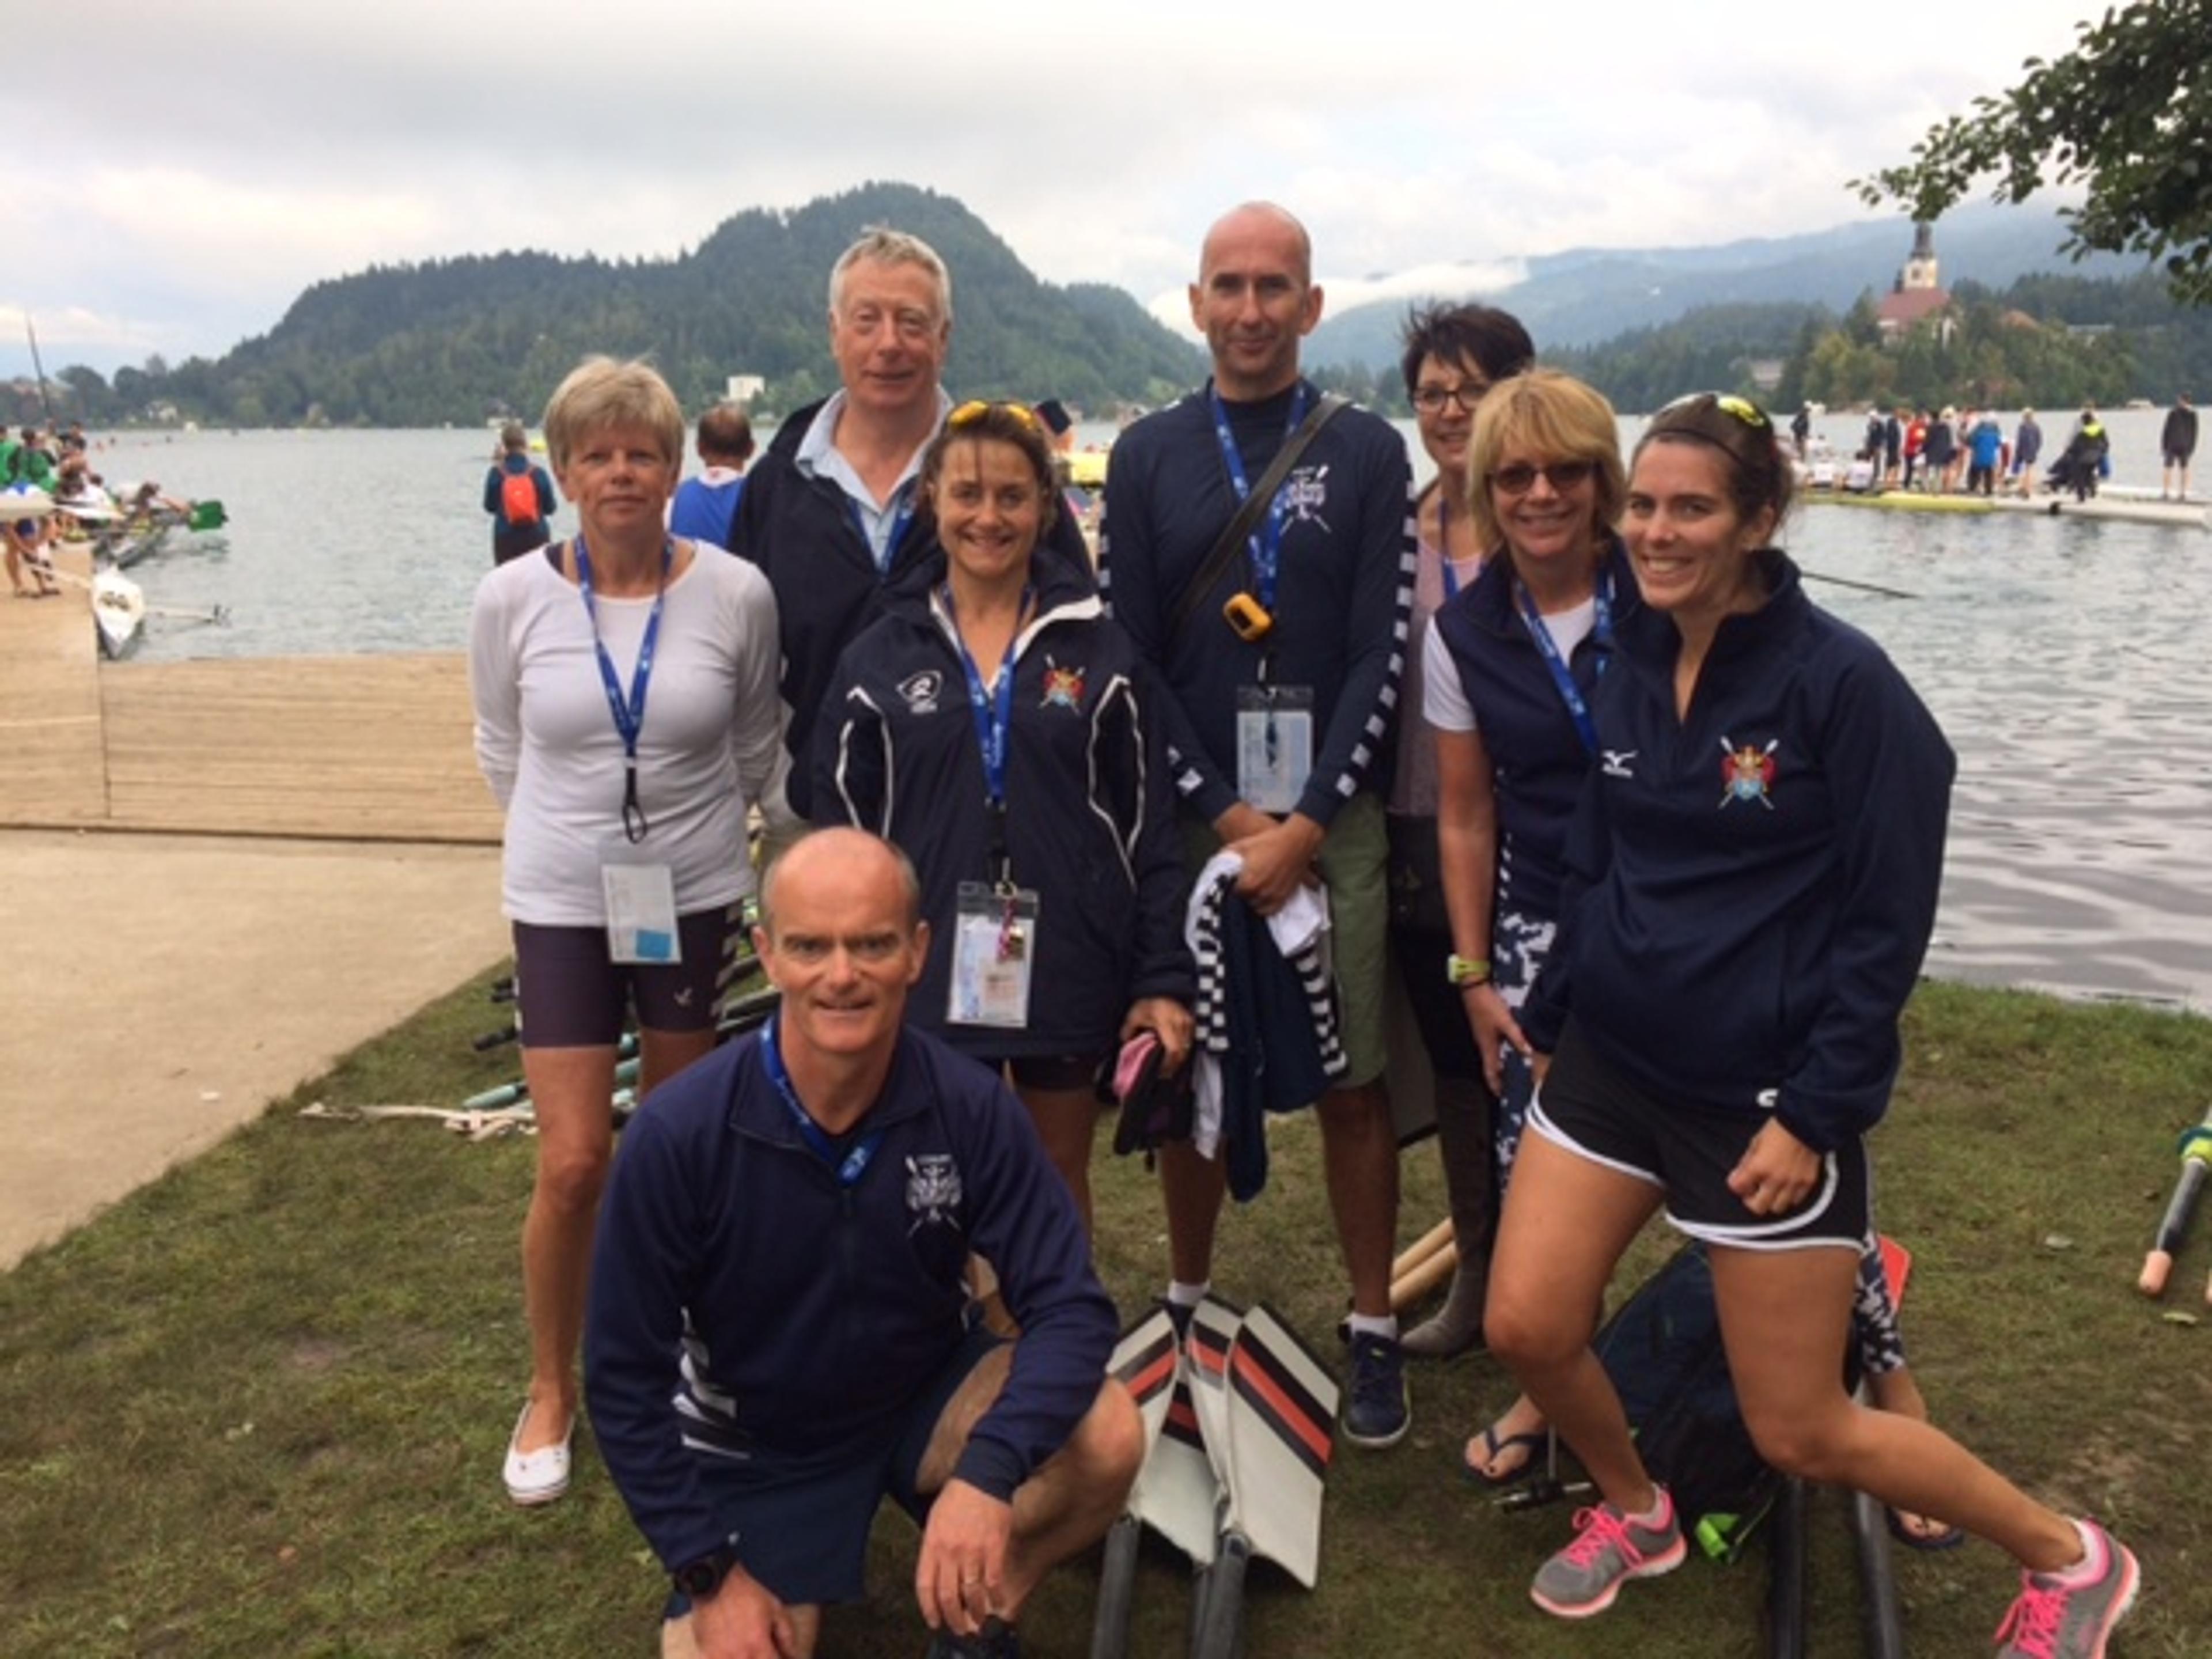 Sudbury 'seniors' (a very unfair term) pose for a photo at the banks of the beautiful Lake Bled, albeit on an overcast day.